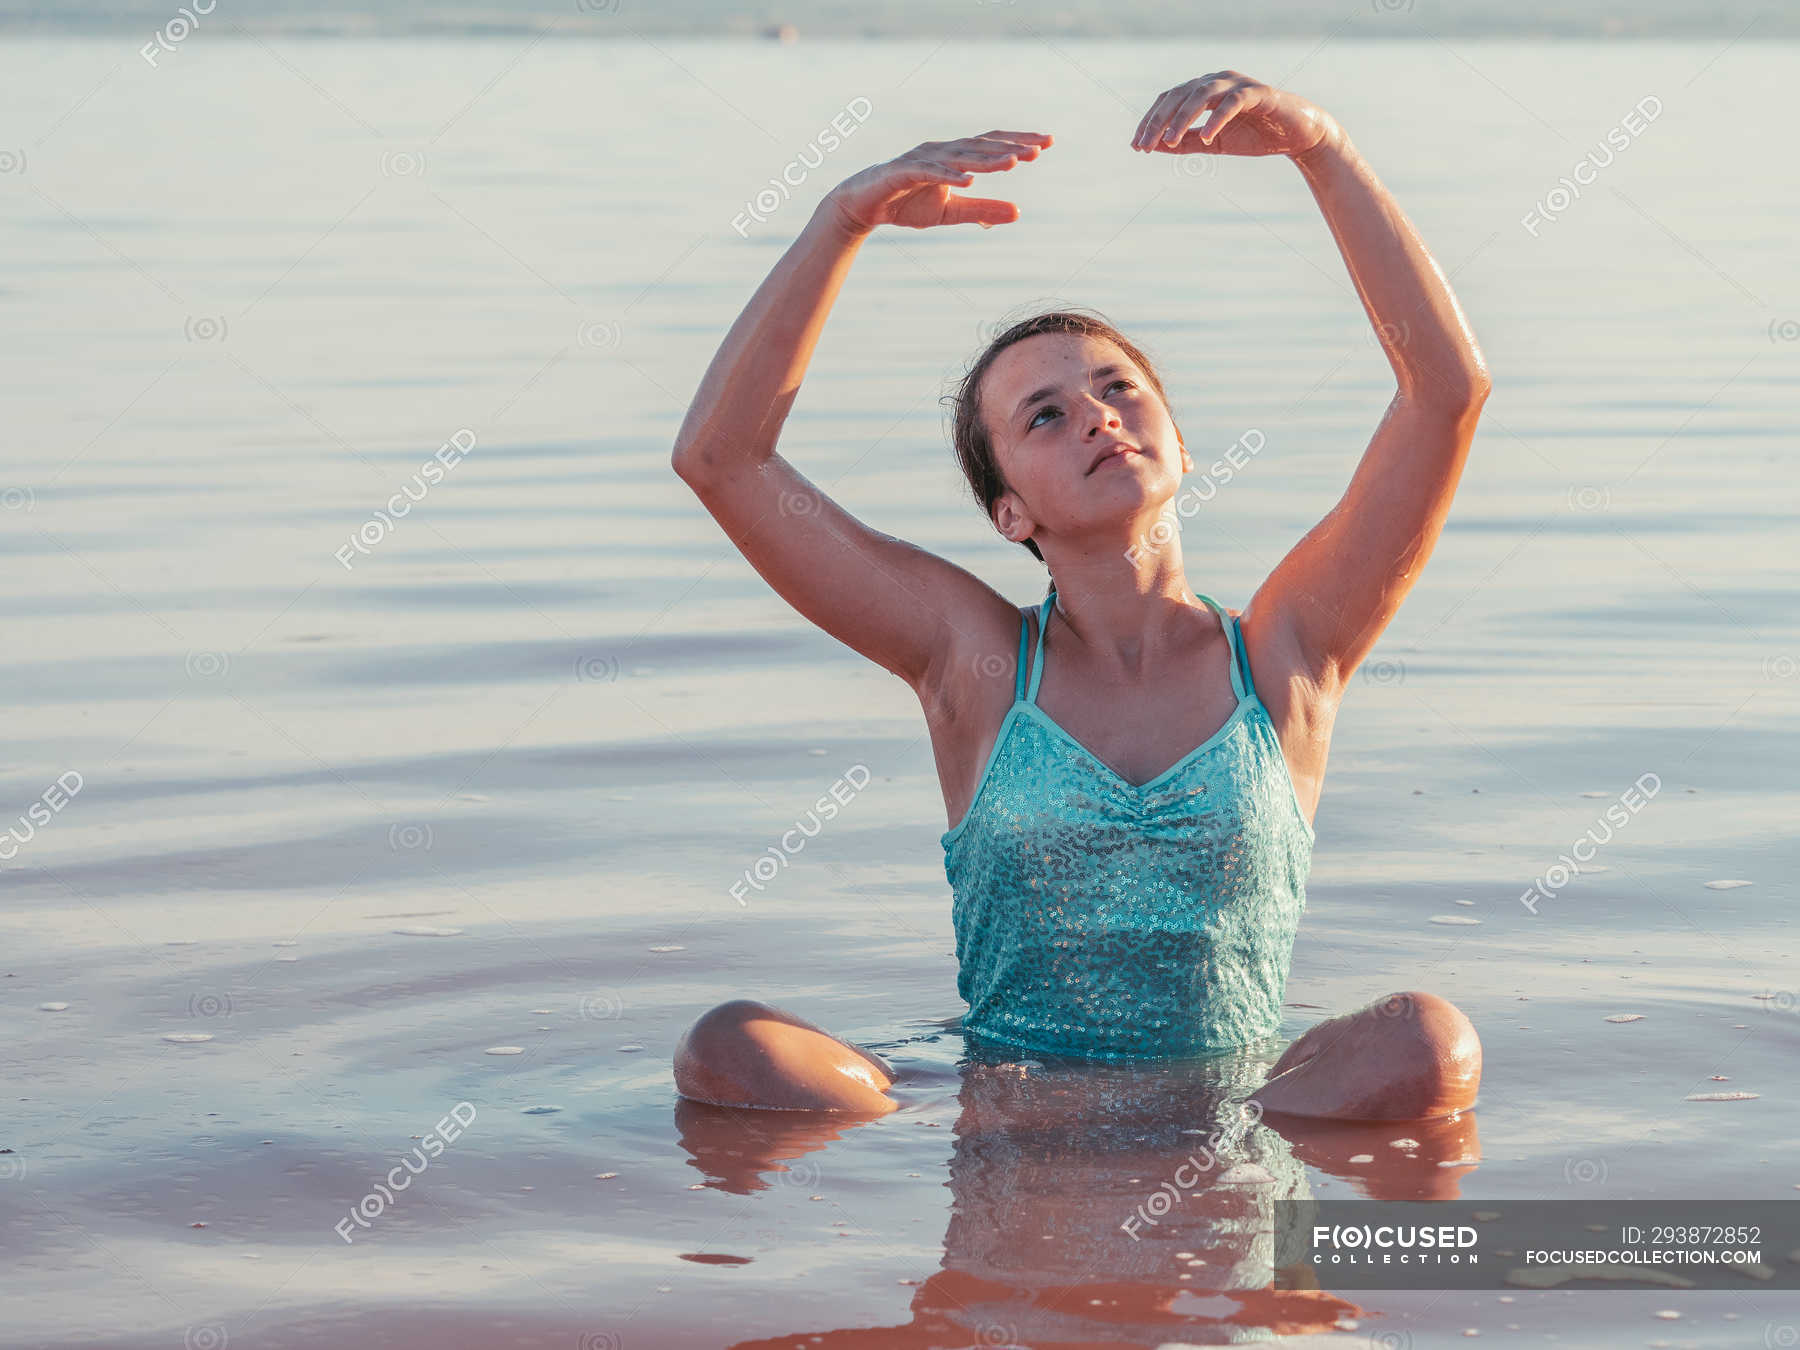 Thoughtful Girl Sitting In Water With Hands Up And Looking Up — Enjoying Lifestyle Stock